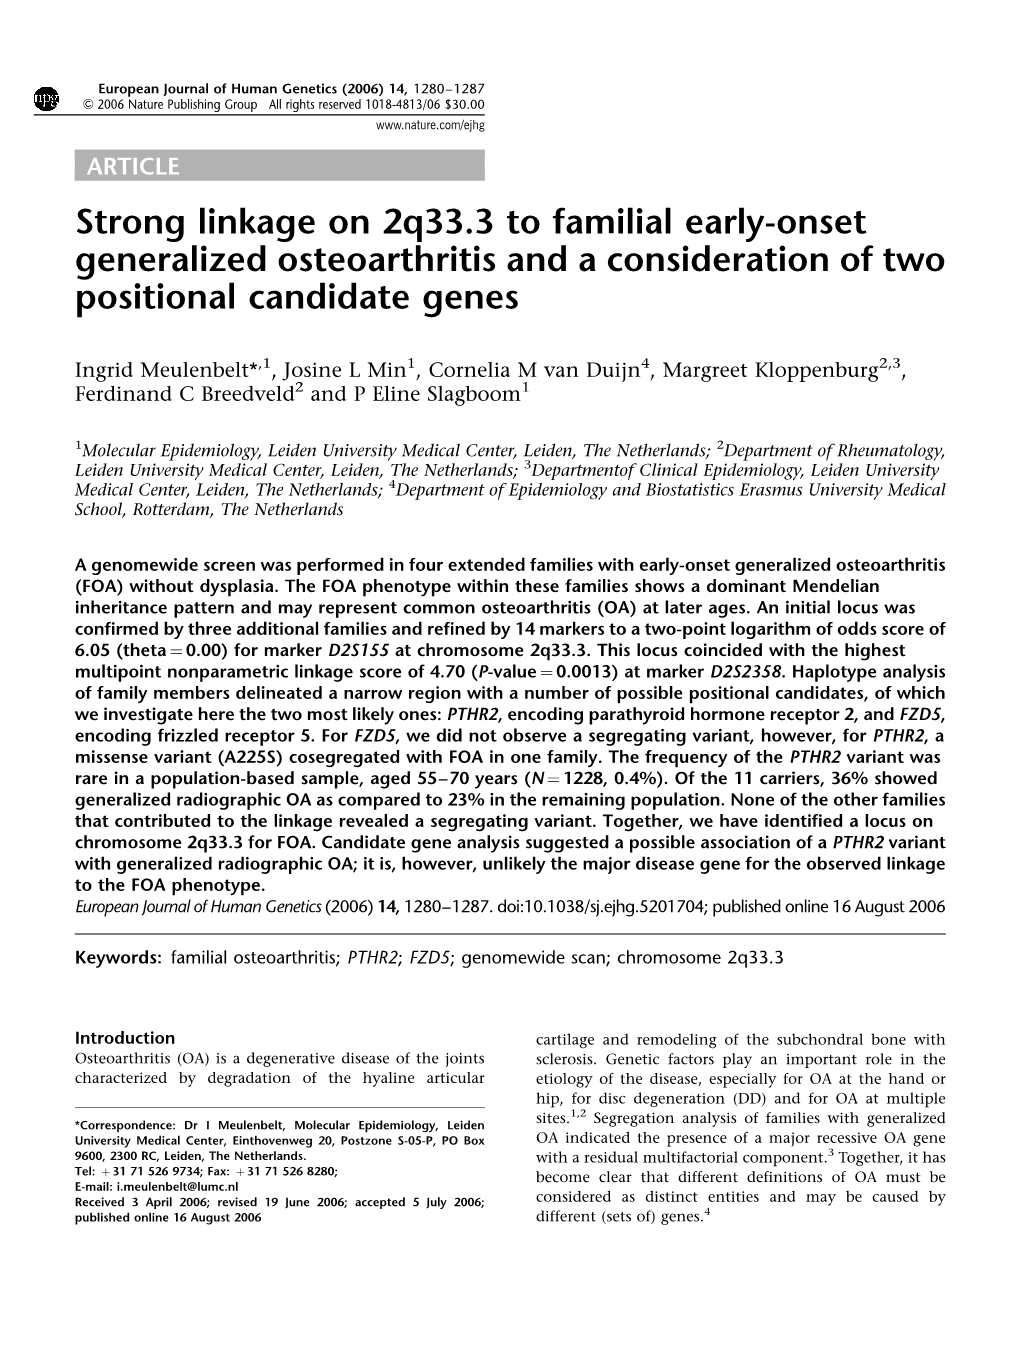 Strong Linkage on 2Q33.3 to Familial Early-Onset Generalized Osteoarthritis and a Consideration of Two Positional Candidate Genes